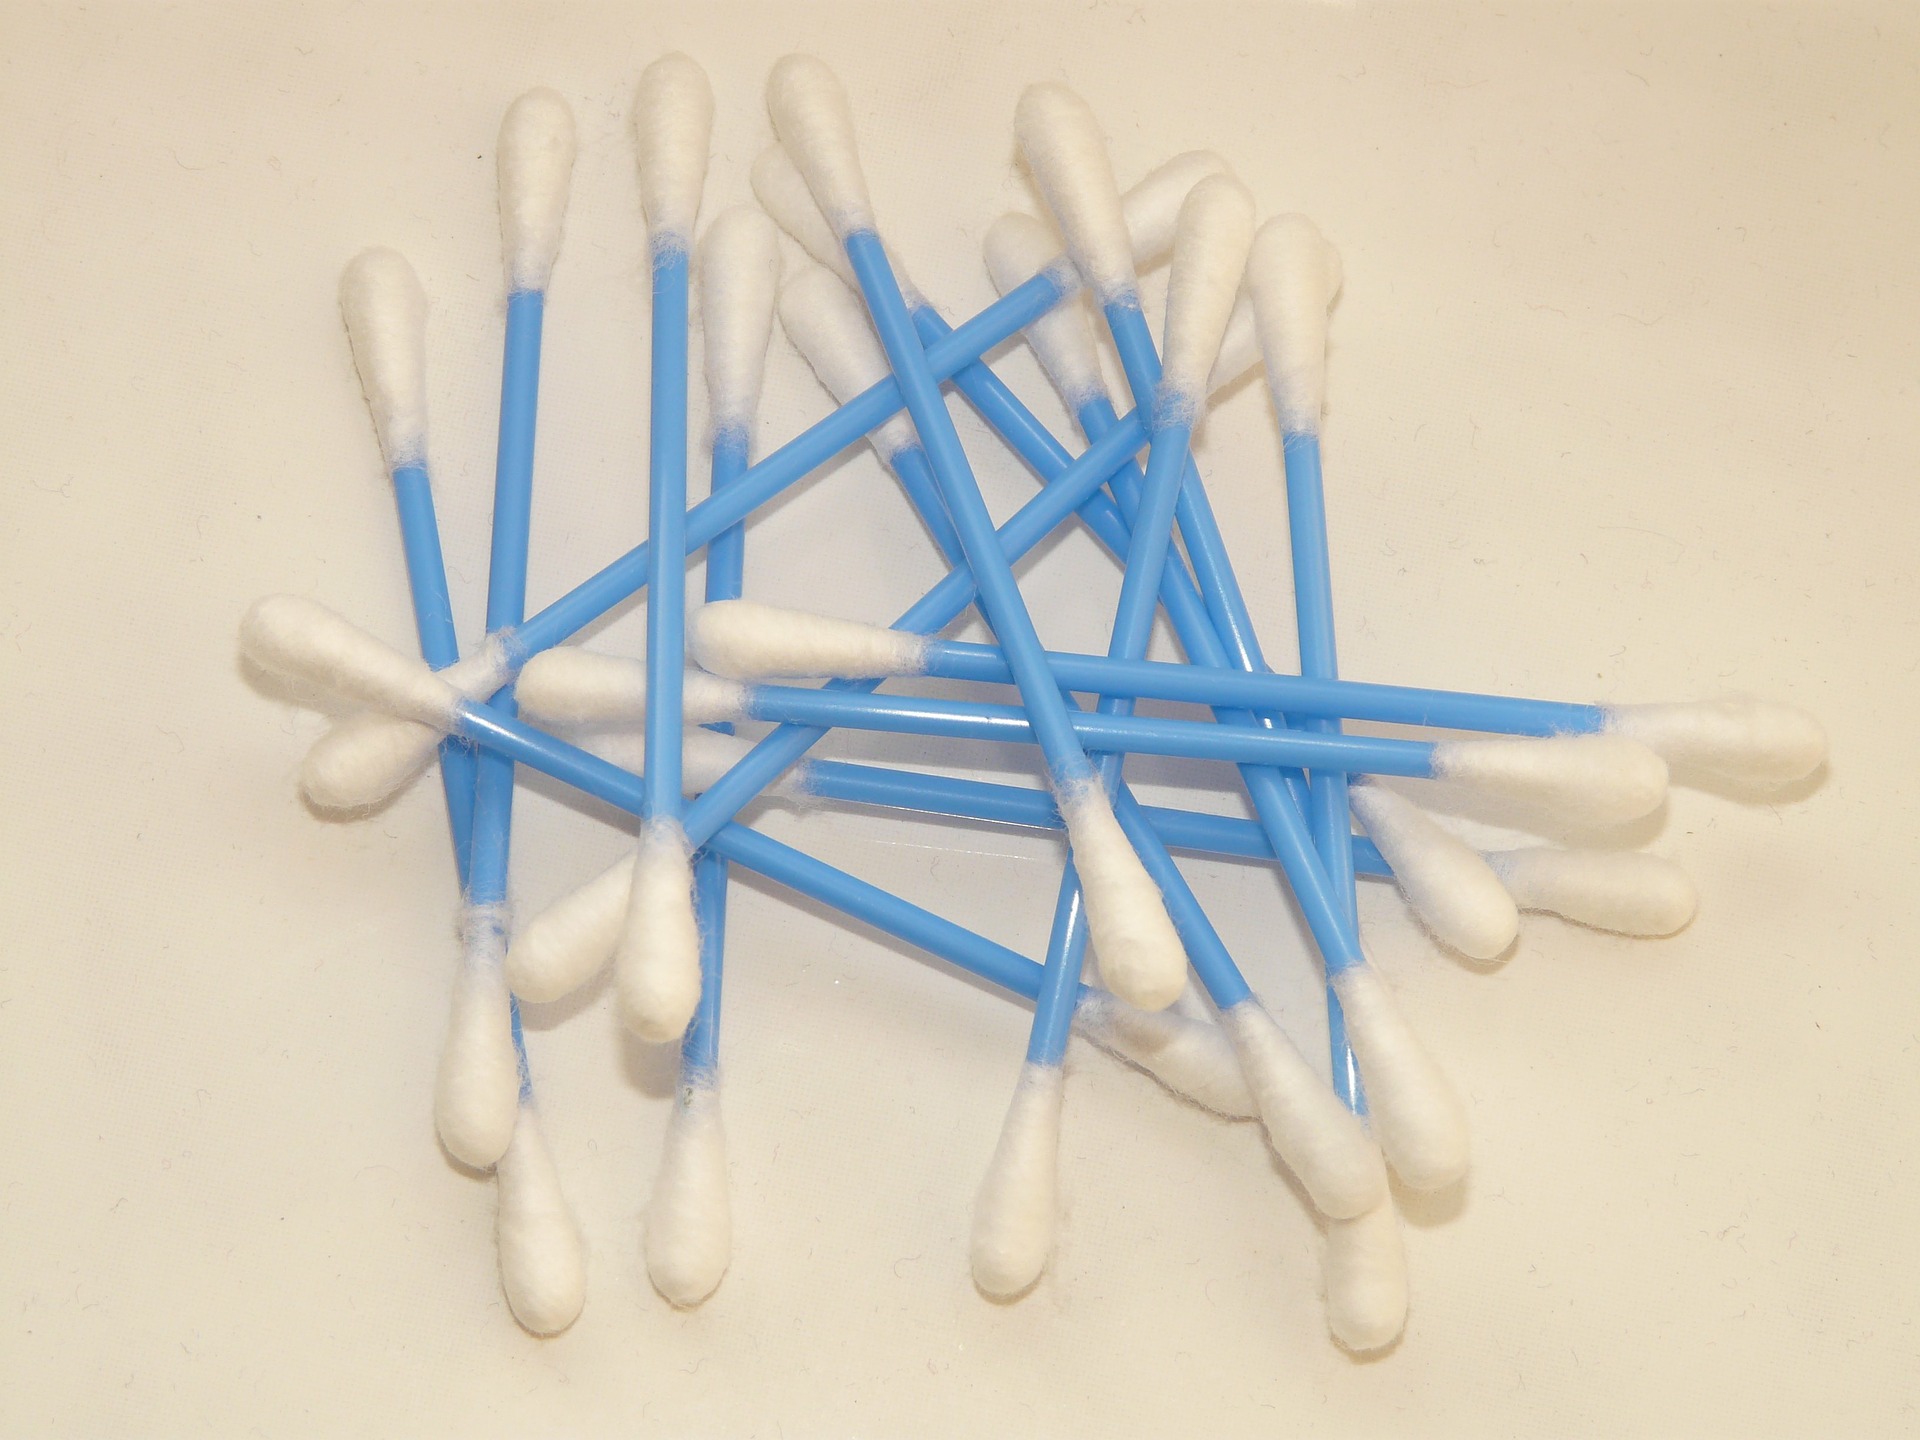 A pile of cotton swabs.